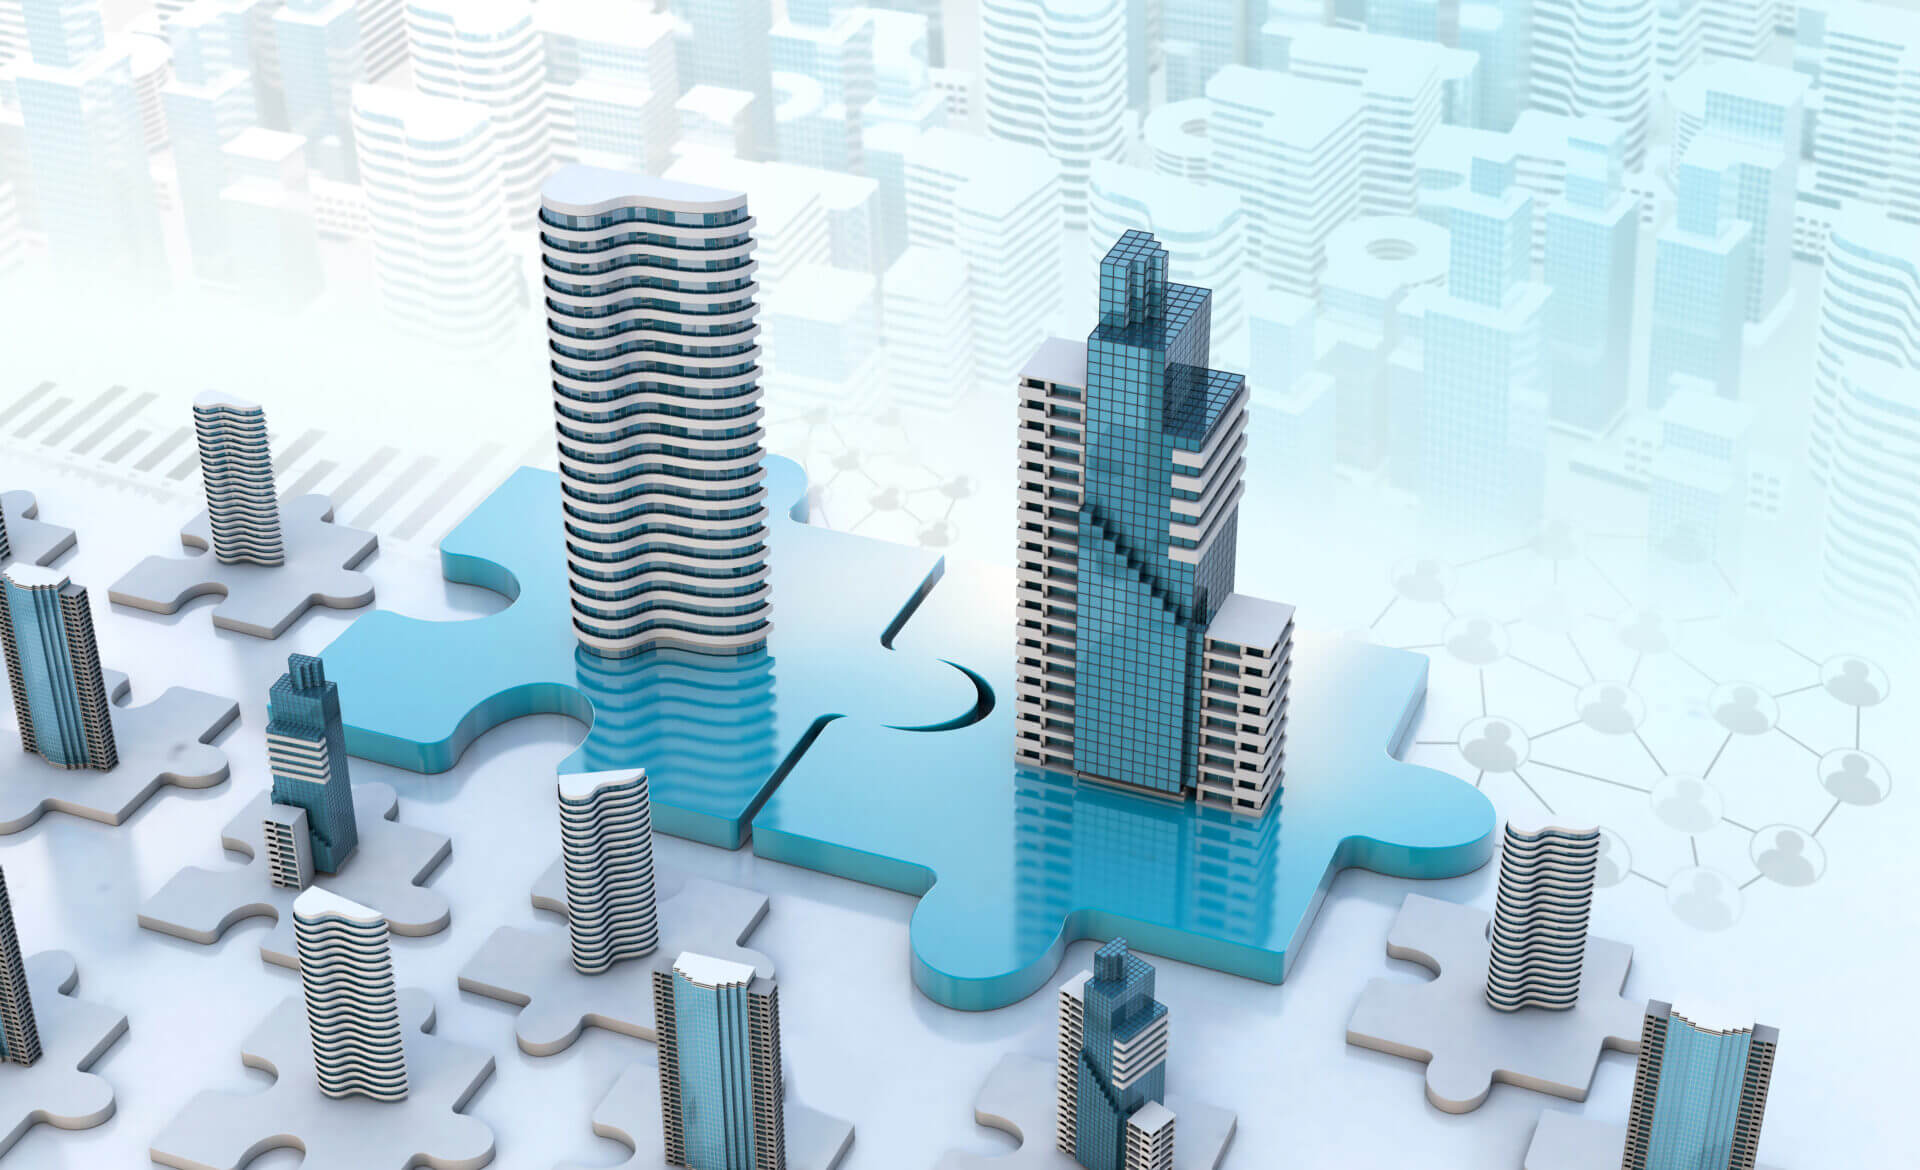 Illustration showing two skyscrapers on top of puzzle pieces joining together, representing a merger